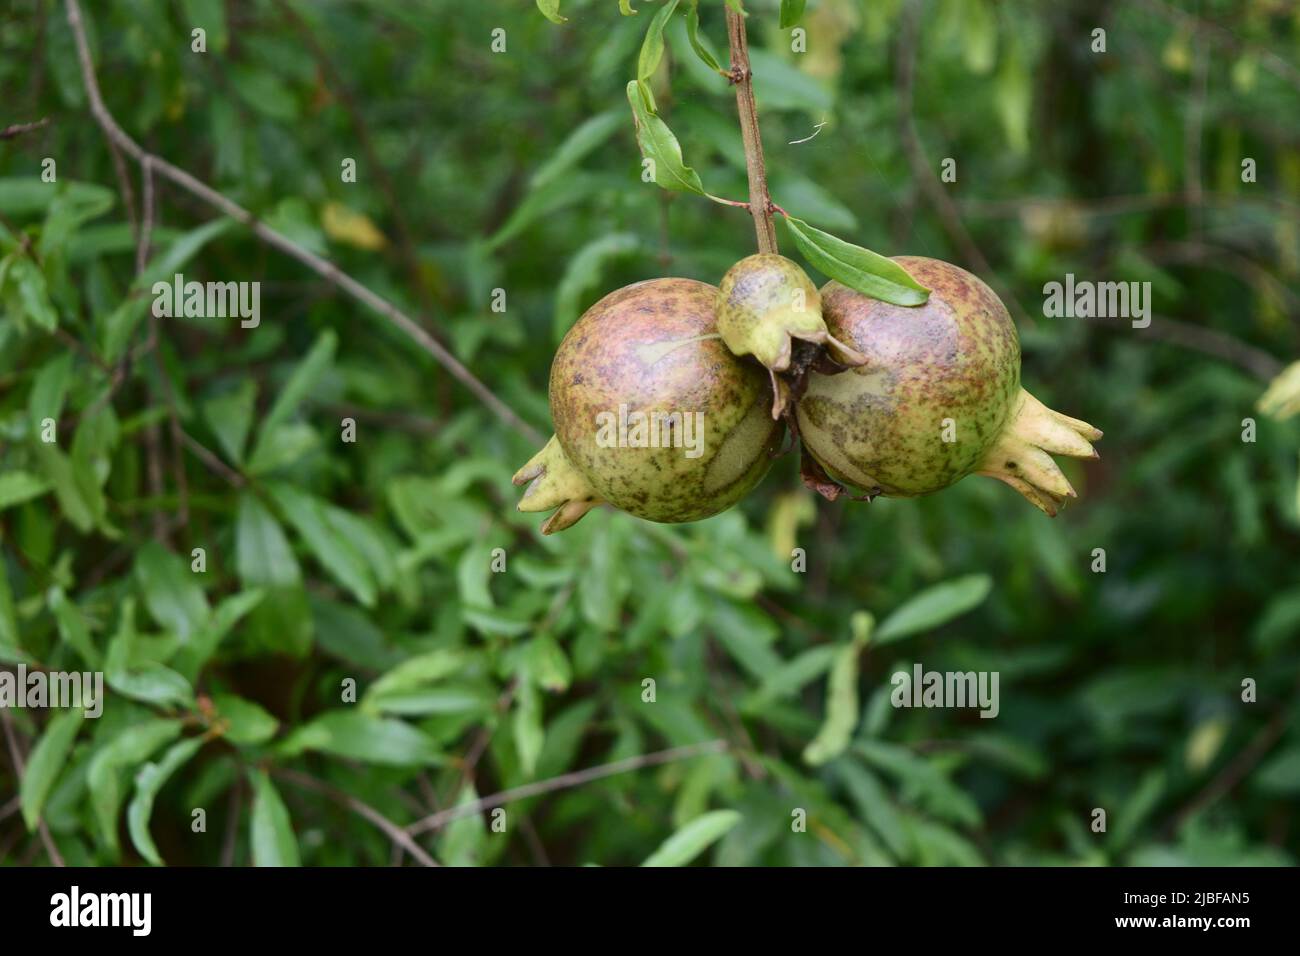 Pomegranate fruit on tree with natural green leaves in background, Thailand Stock Photo